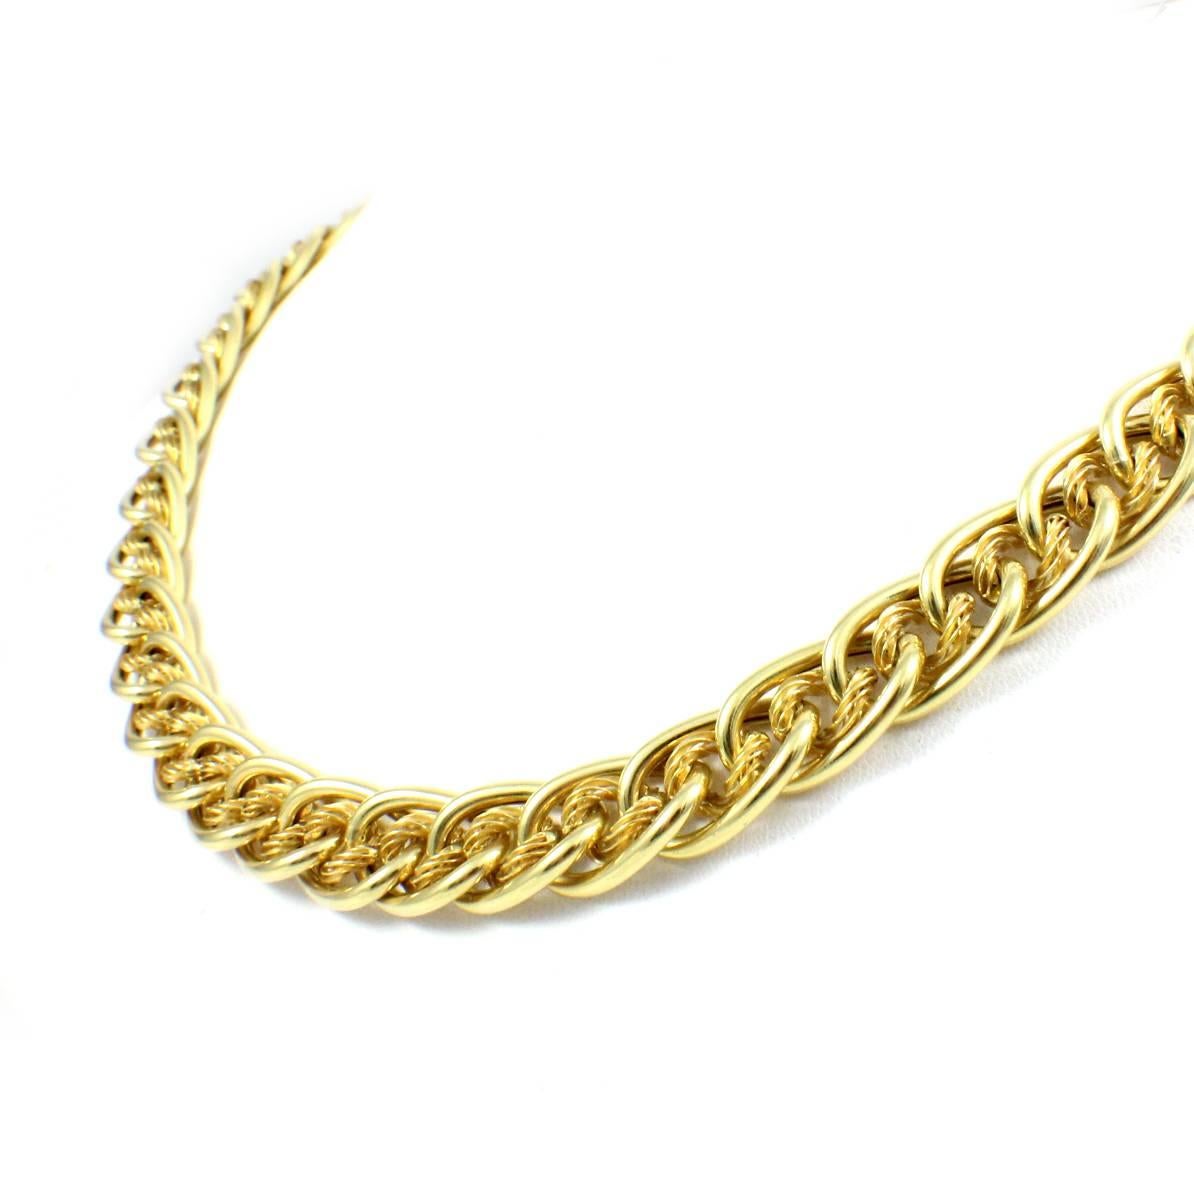 This necklace is made in 14k yellow gold. The necklace features multiple interlocking chains, stamped “Brev” on the clasp. The necklace itself measures 18 inches in length and 10mm in width. It weighs 50.1 grams.  